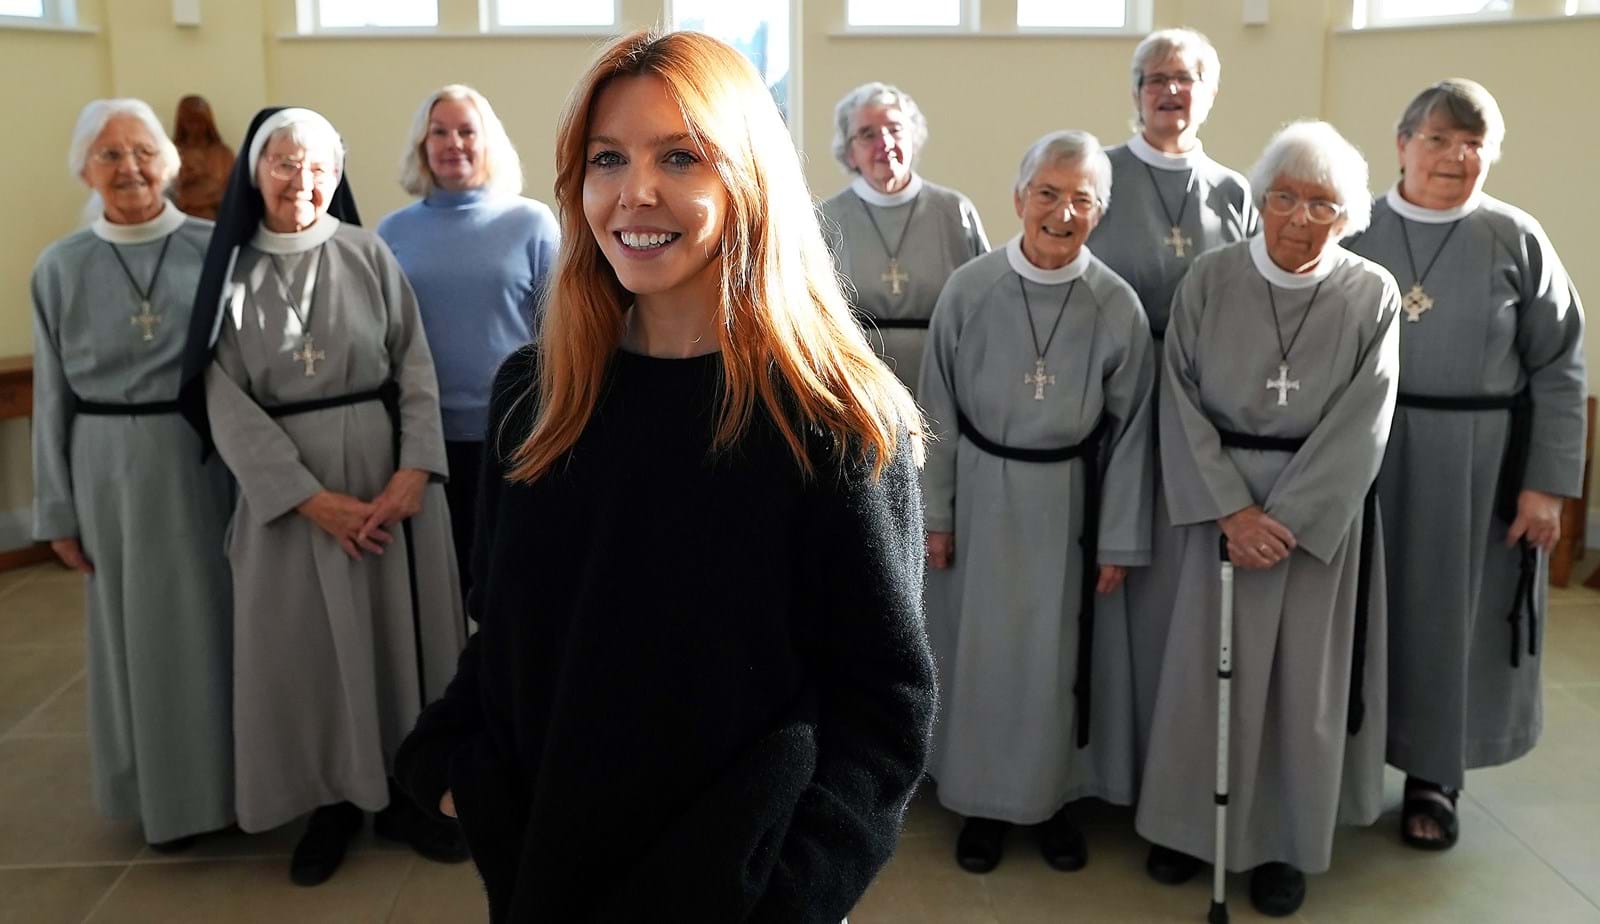 Firecracker Scotland commissioned by BBC Factual for a convent special with Stacey Dooley